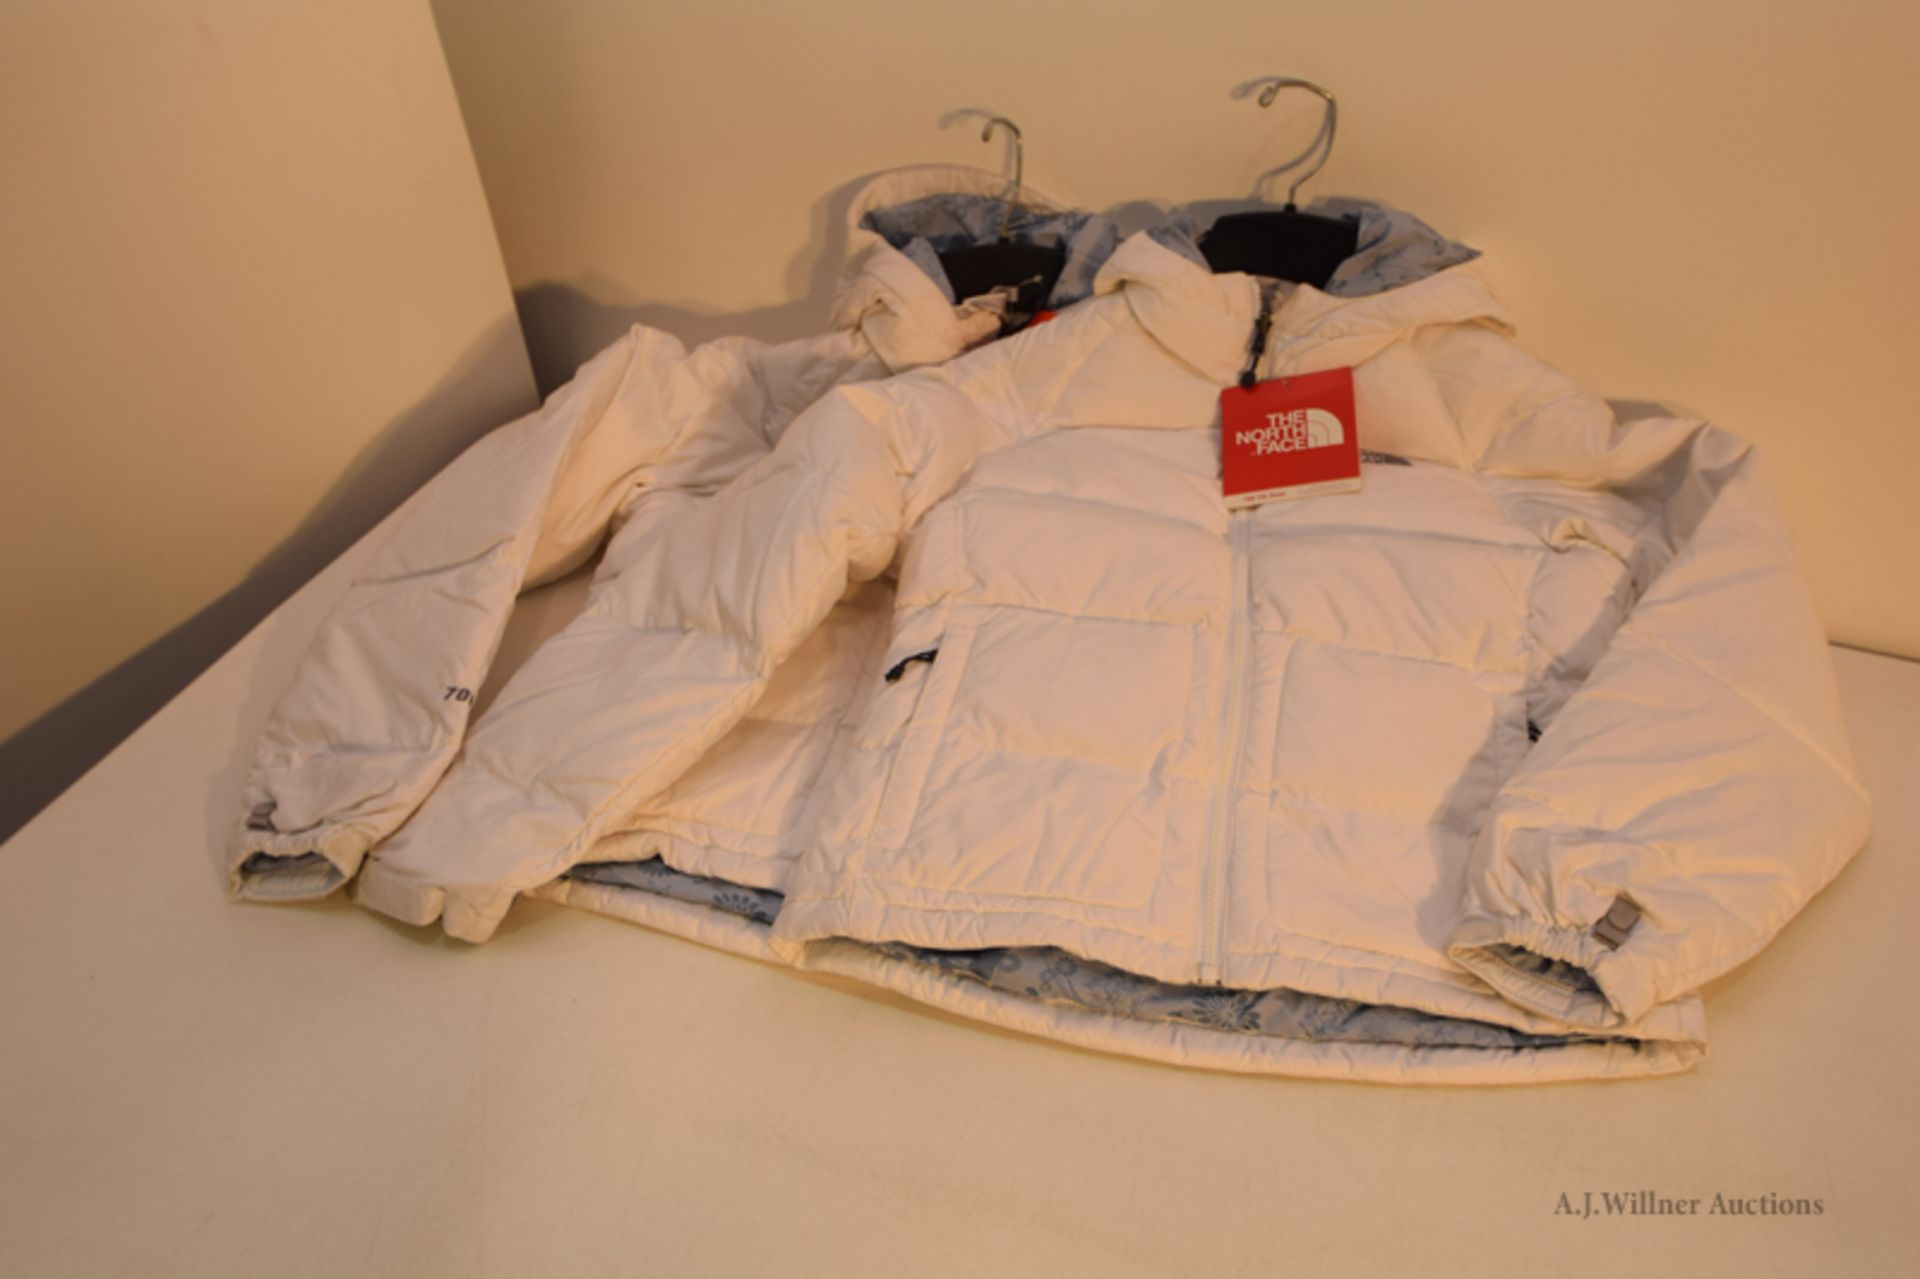 The North Face Clothing - Image 4 of 6